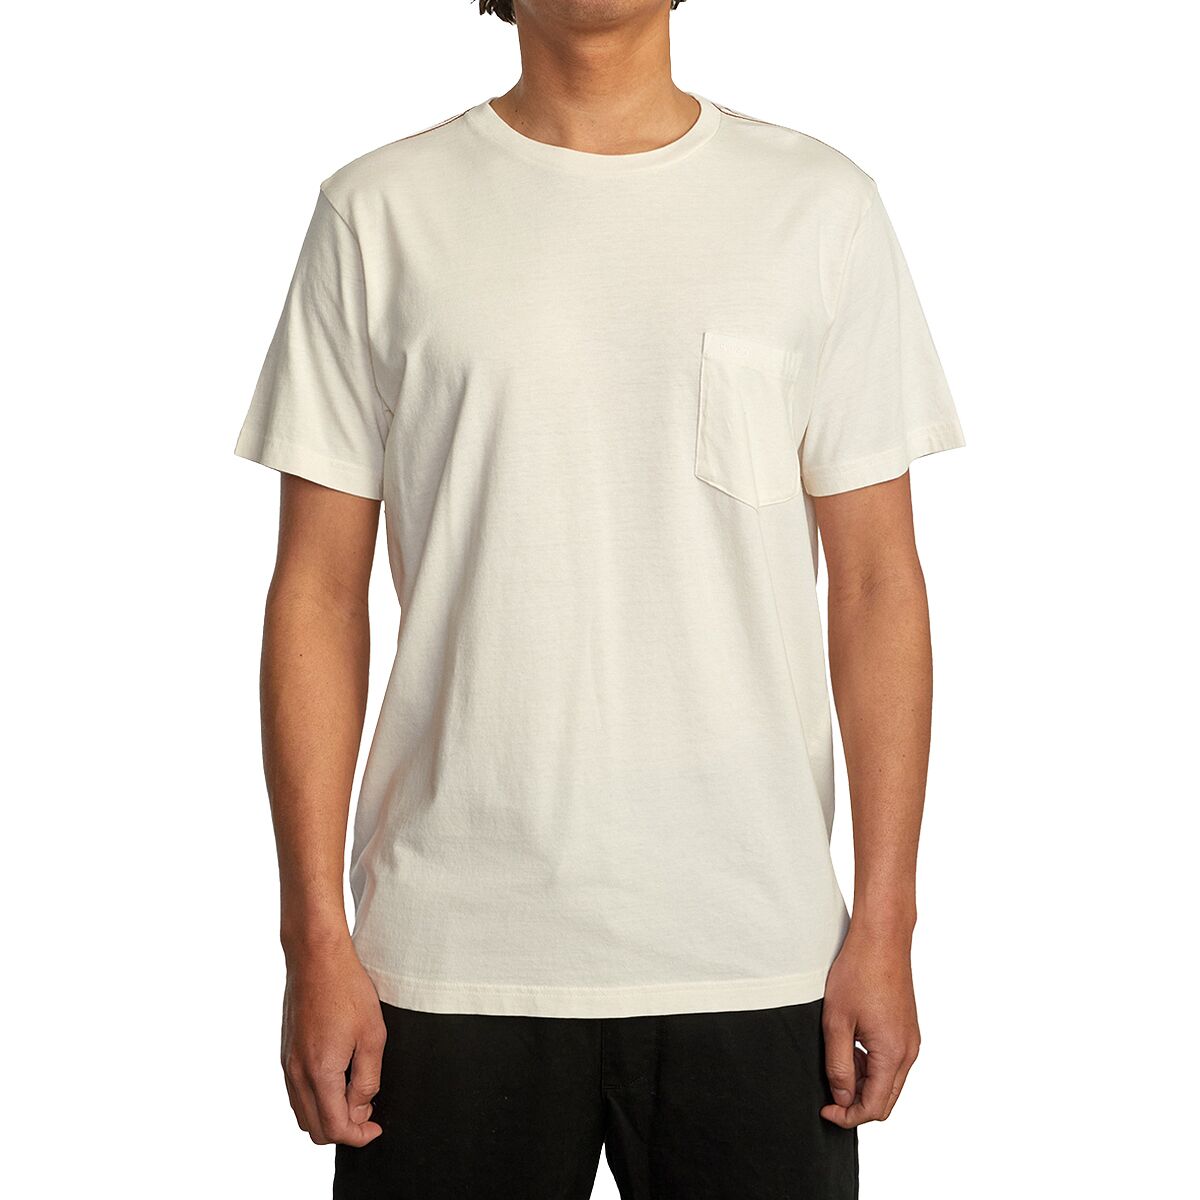 RVCA Men's T-Shirts and short-sleeves, stylish comfort clothing